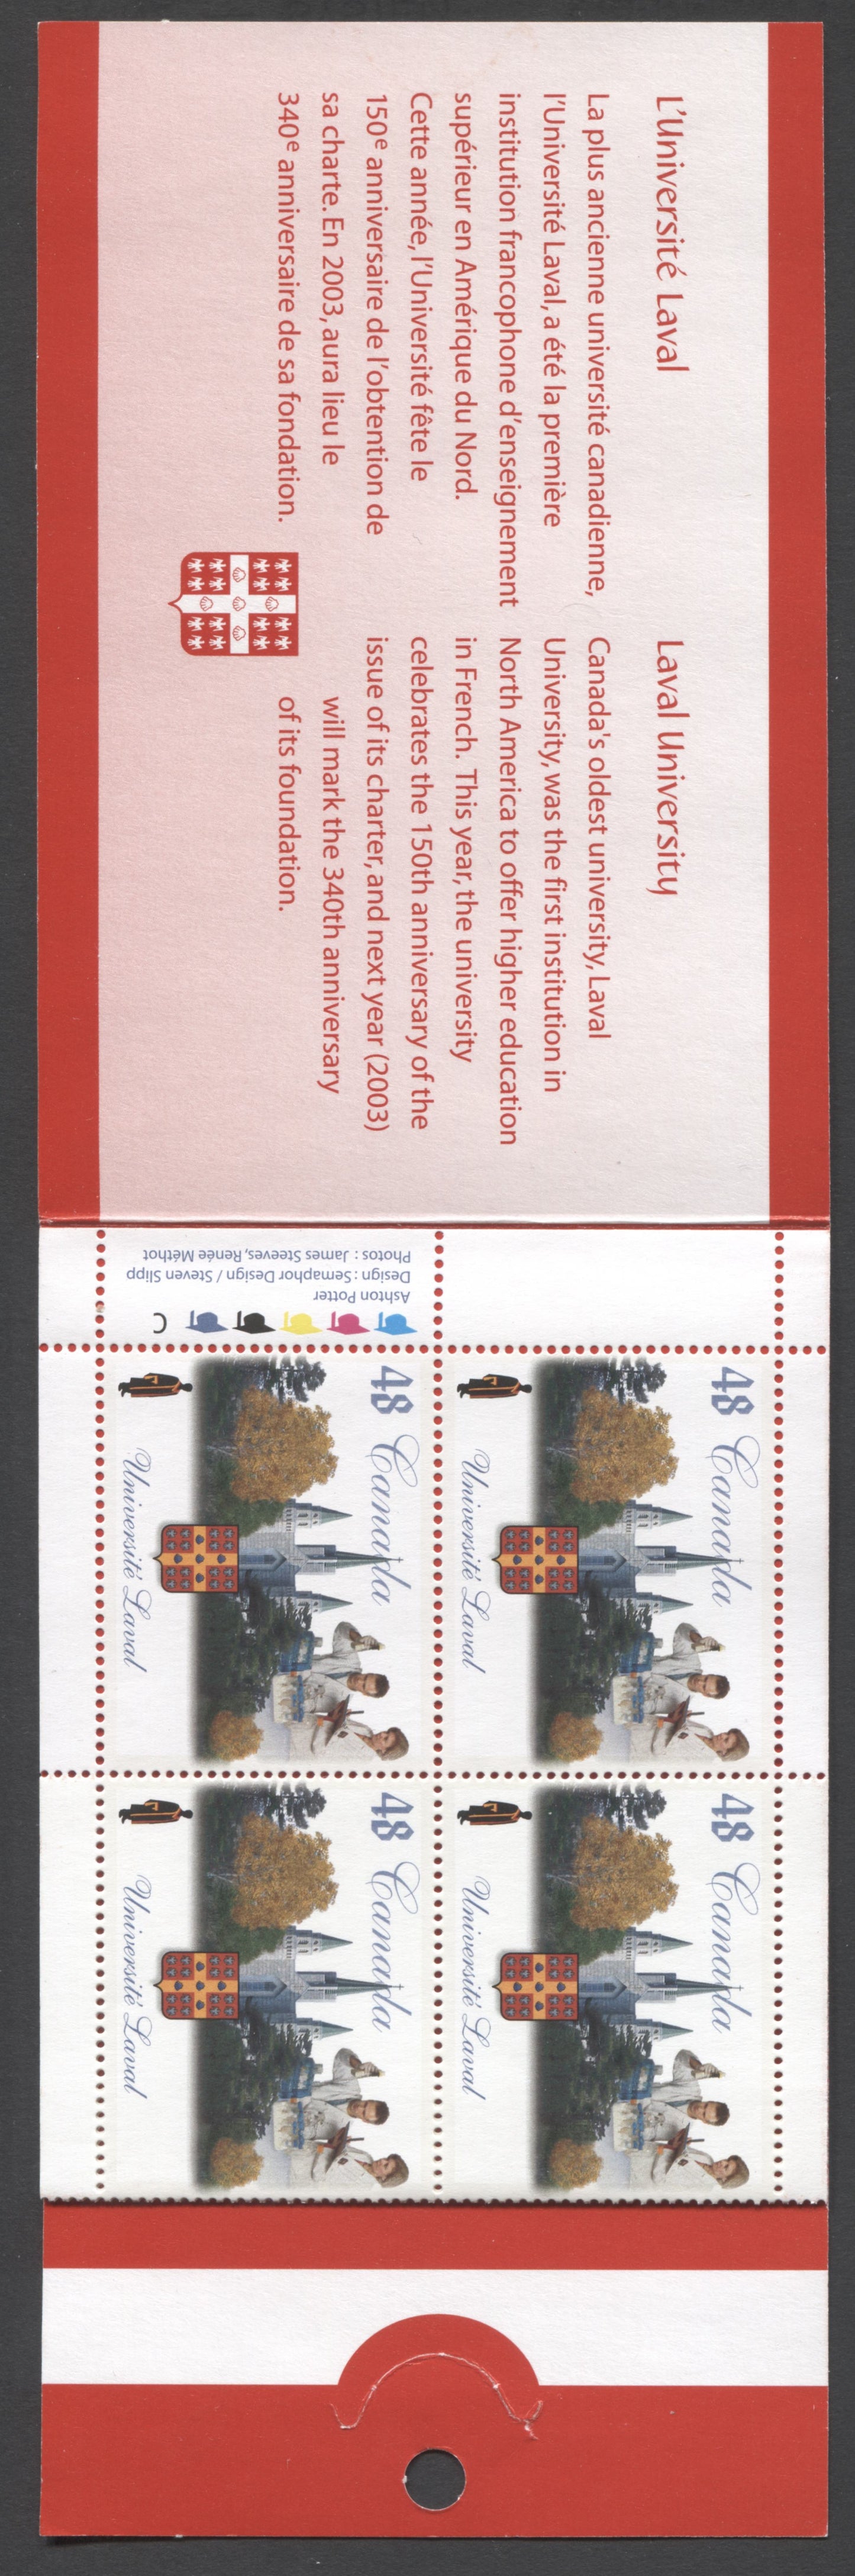 Canada #BK255a-b 2002 Laval University Issue, Complete $3.84 Booklet, Tullis Russell Coatings Paper, Dead Paper, 4 mm GT-4 Tagging